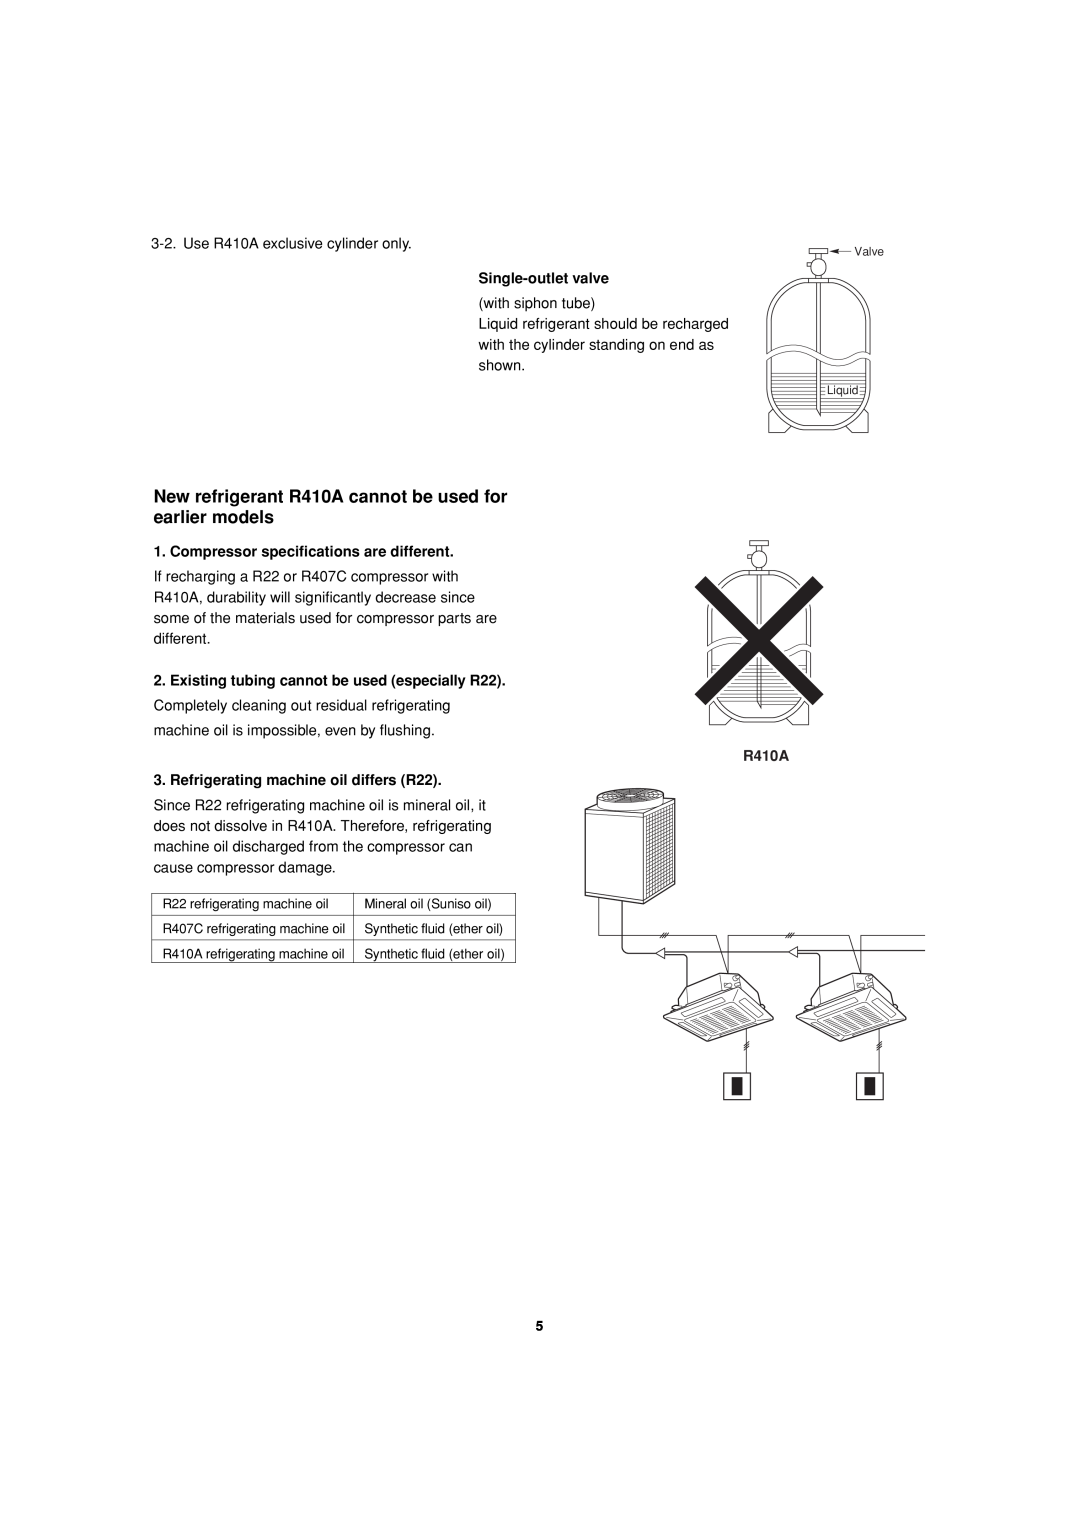 Sanyo 85464359981002 installation instructions Single-outletvalve, Compressor specifications are different, R410A 